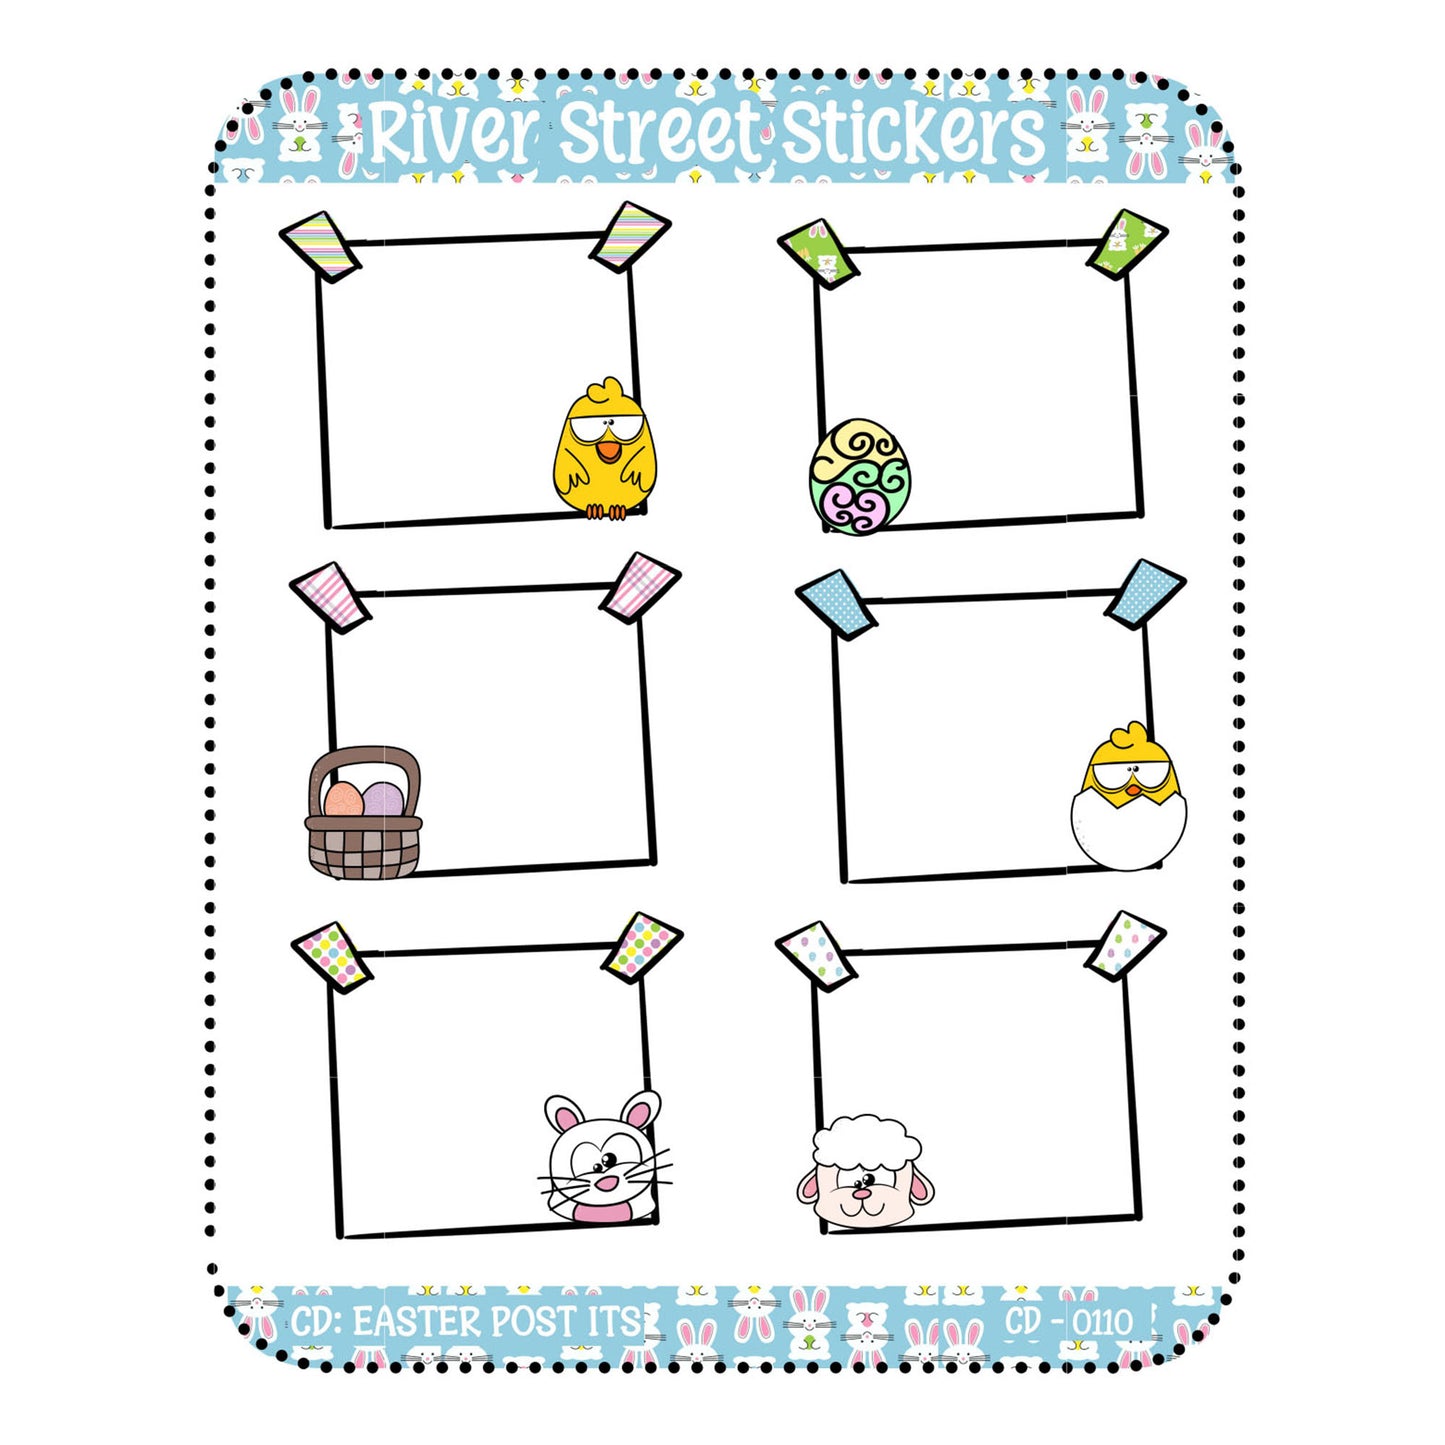 CD: Easter Post Its